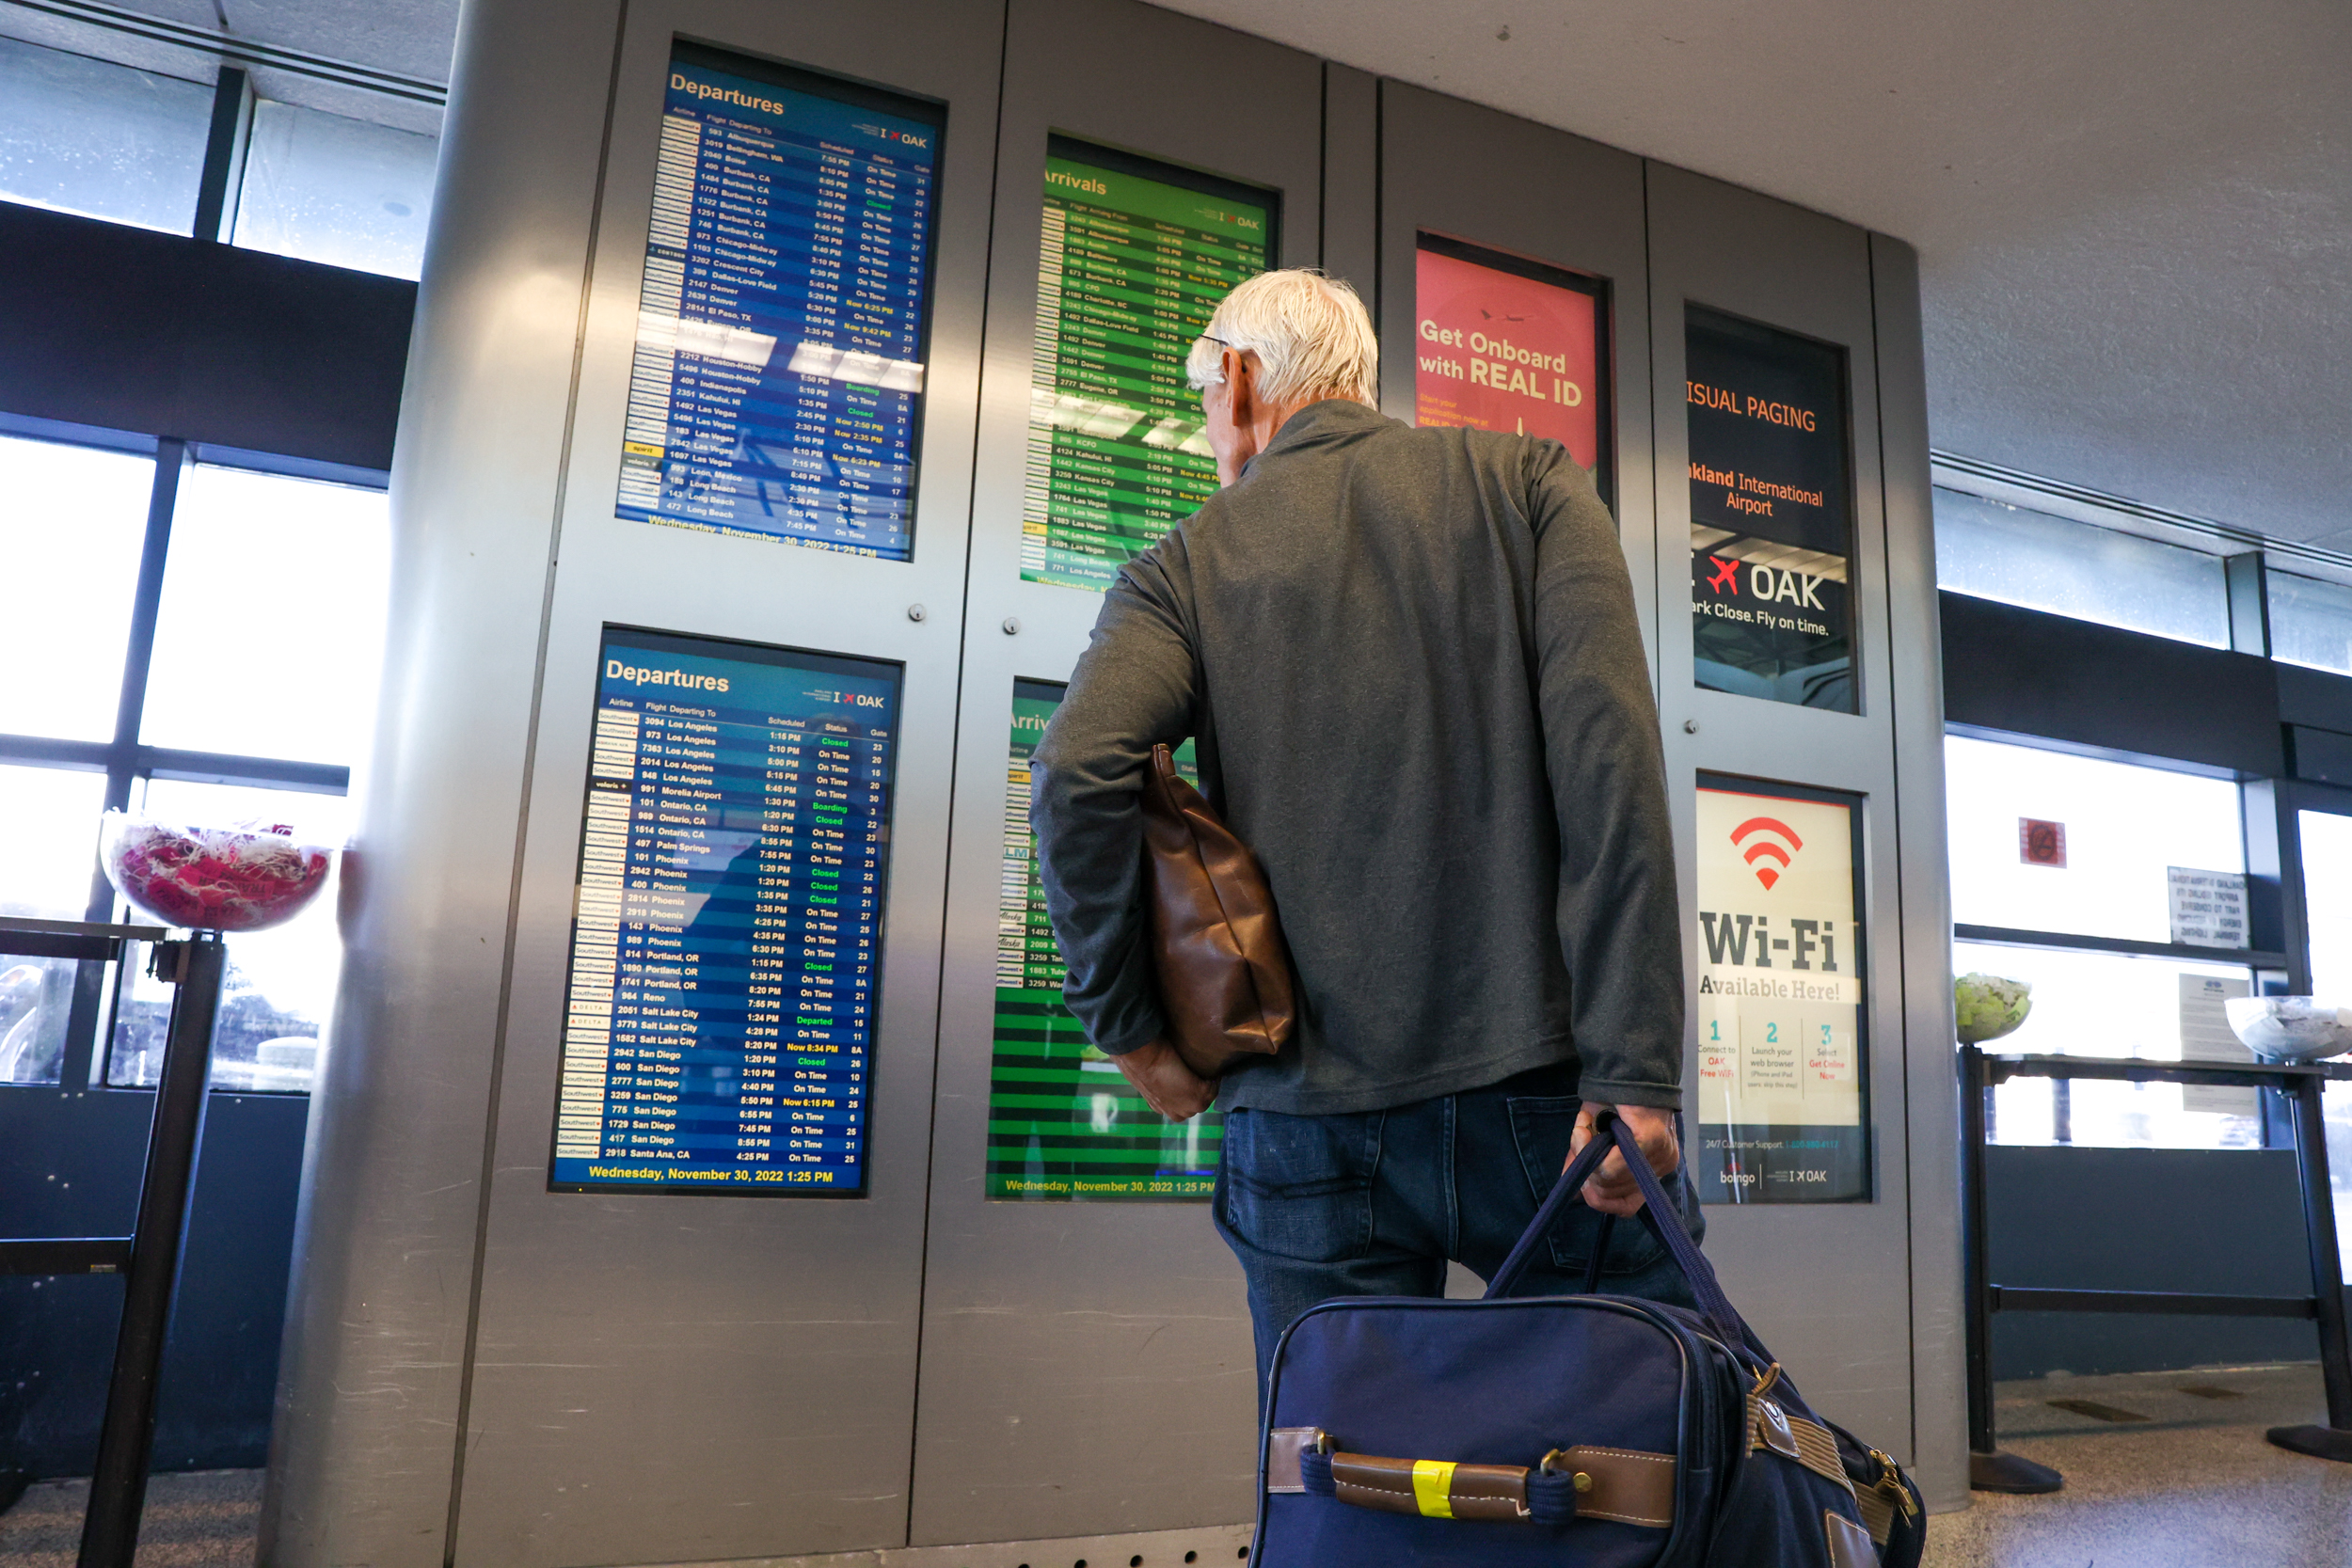 A person checks a flight information display board at an airport, carrying a shoulder bag. Signs for Wi-Fi and REAL ID are visible.